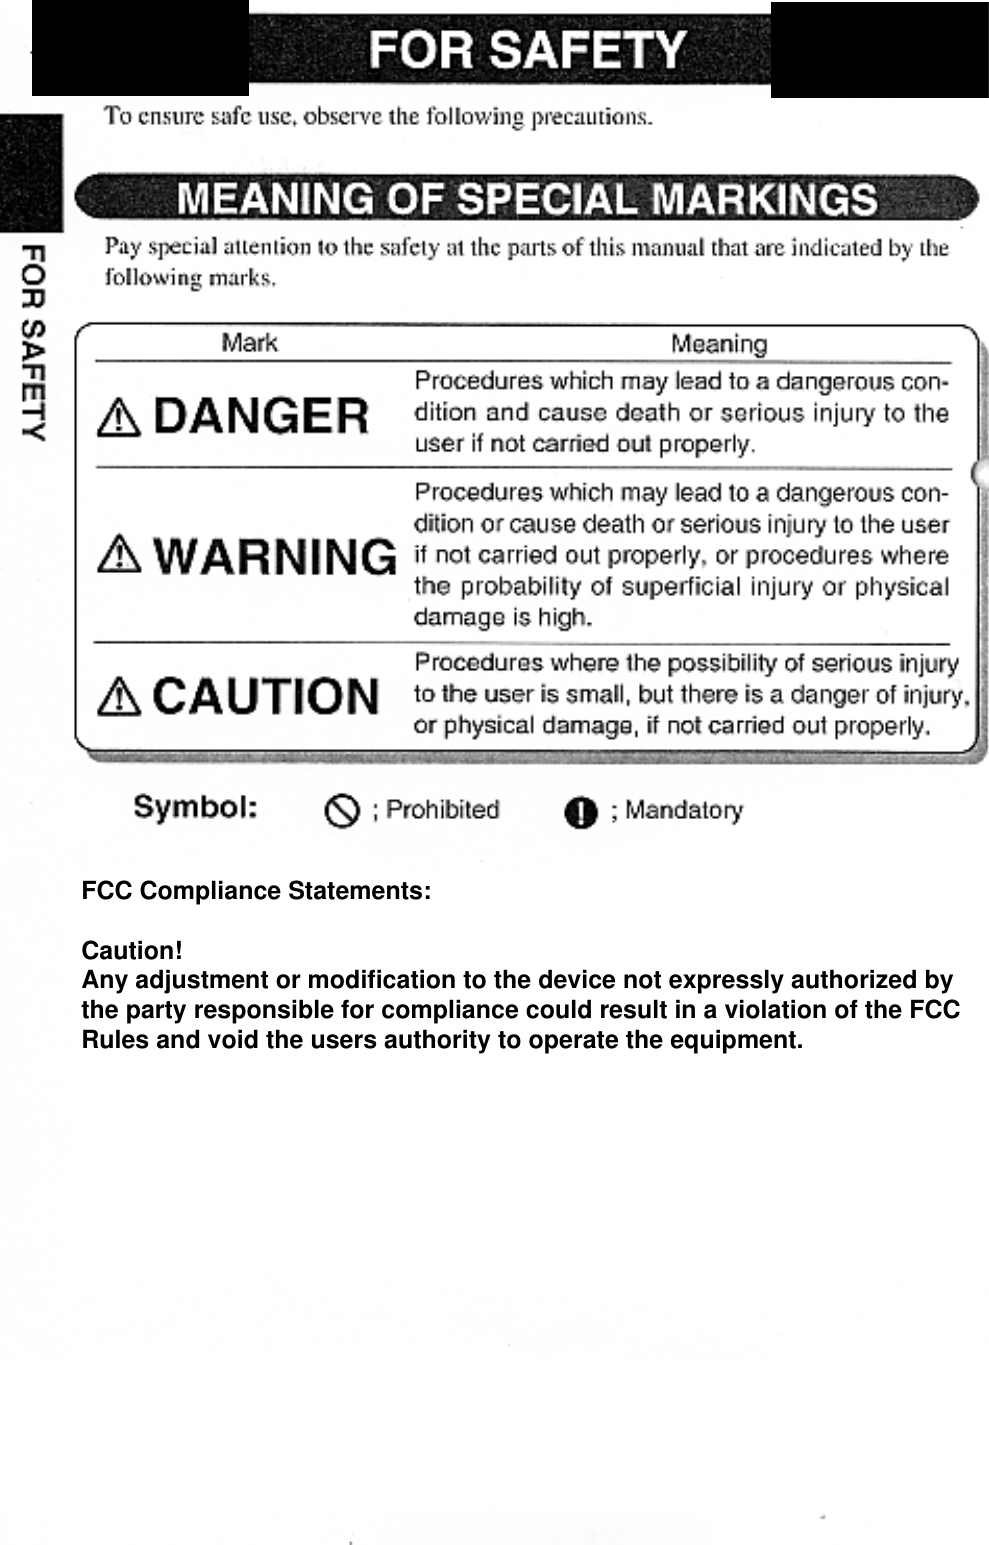 FCC Compliance Statements:Caution!Any adjustment or modification to the device not expressly authorized bythe party responsible for compliance could result in a violation of the FCCRules and void the users authority to operate the equipment.